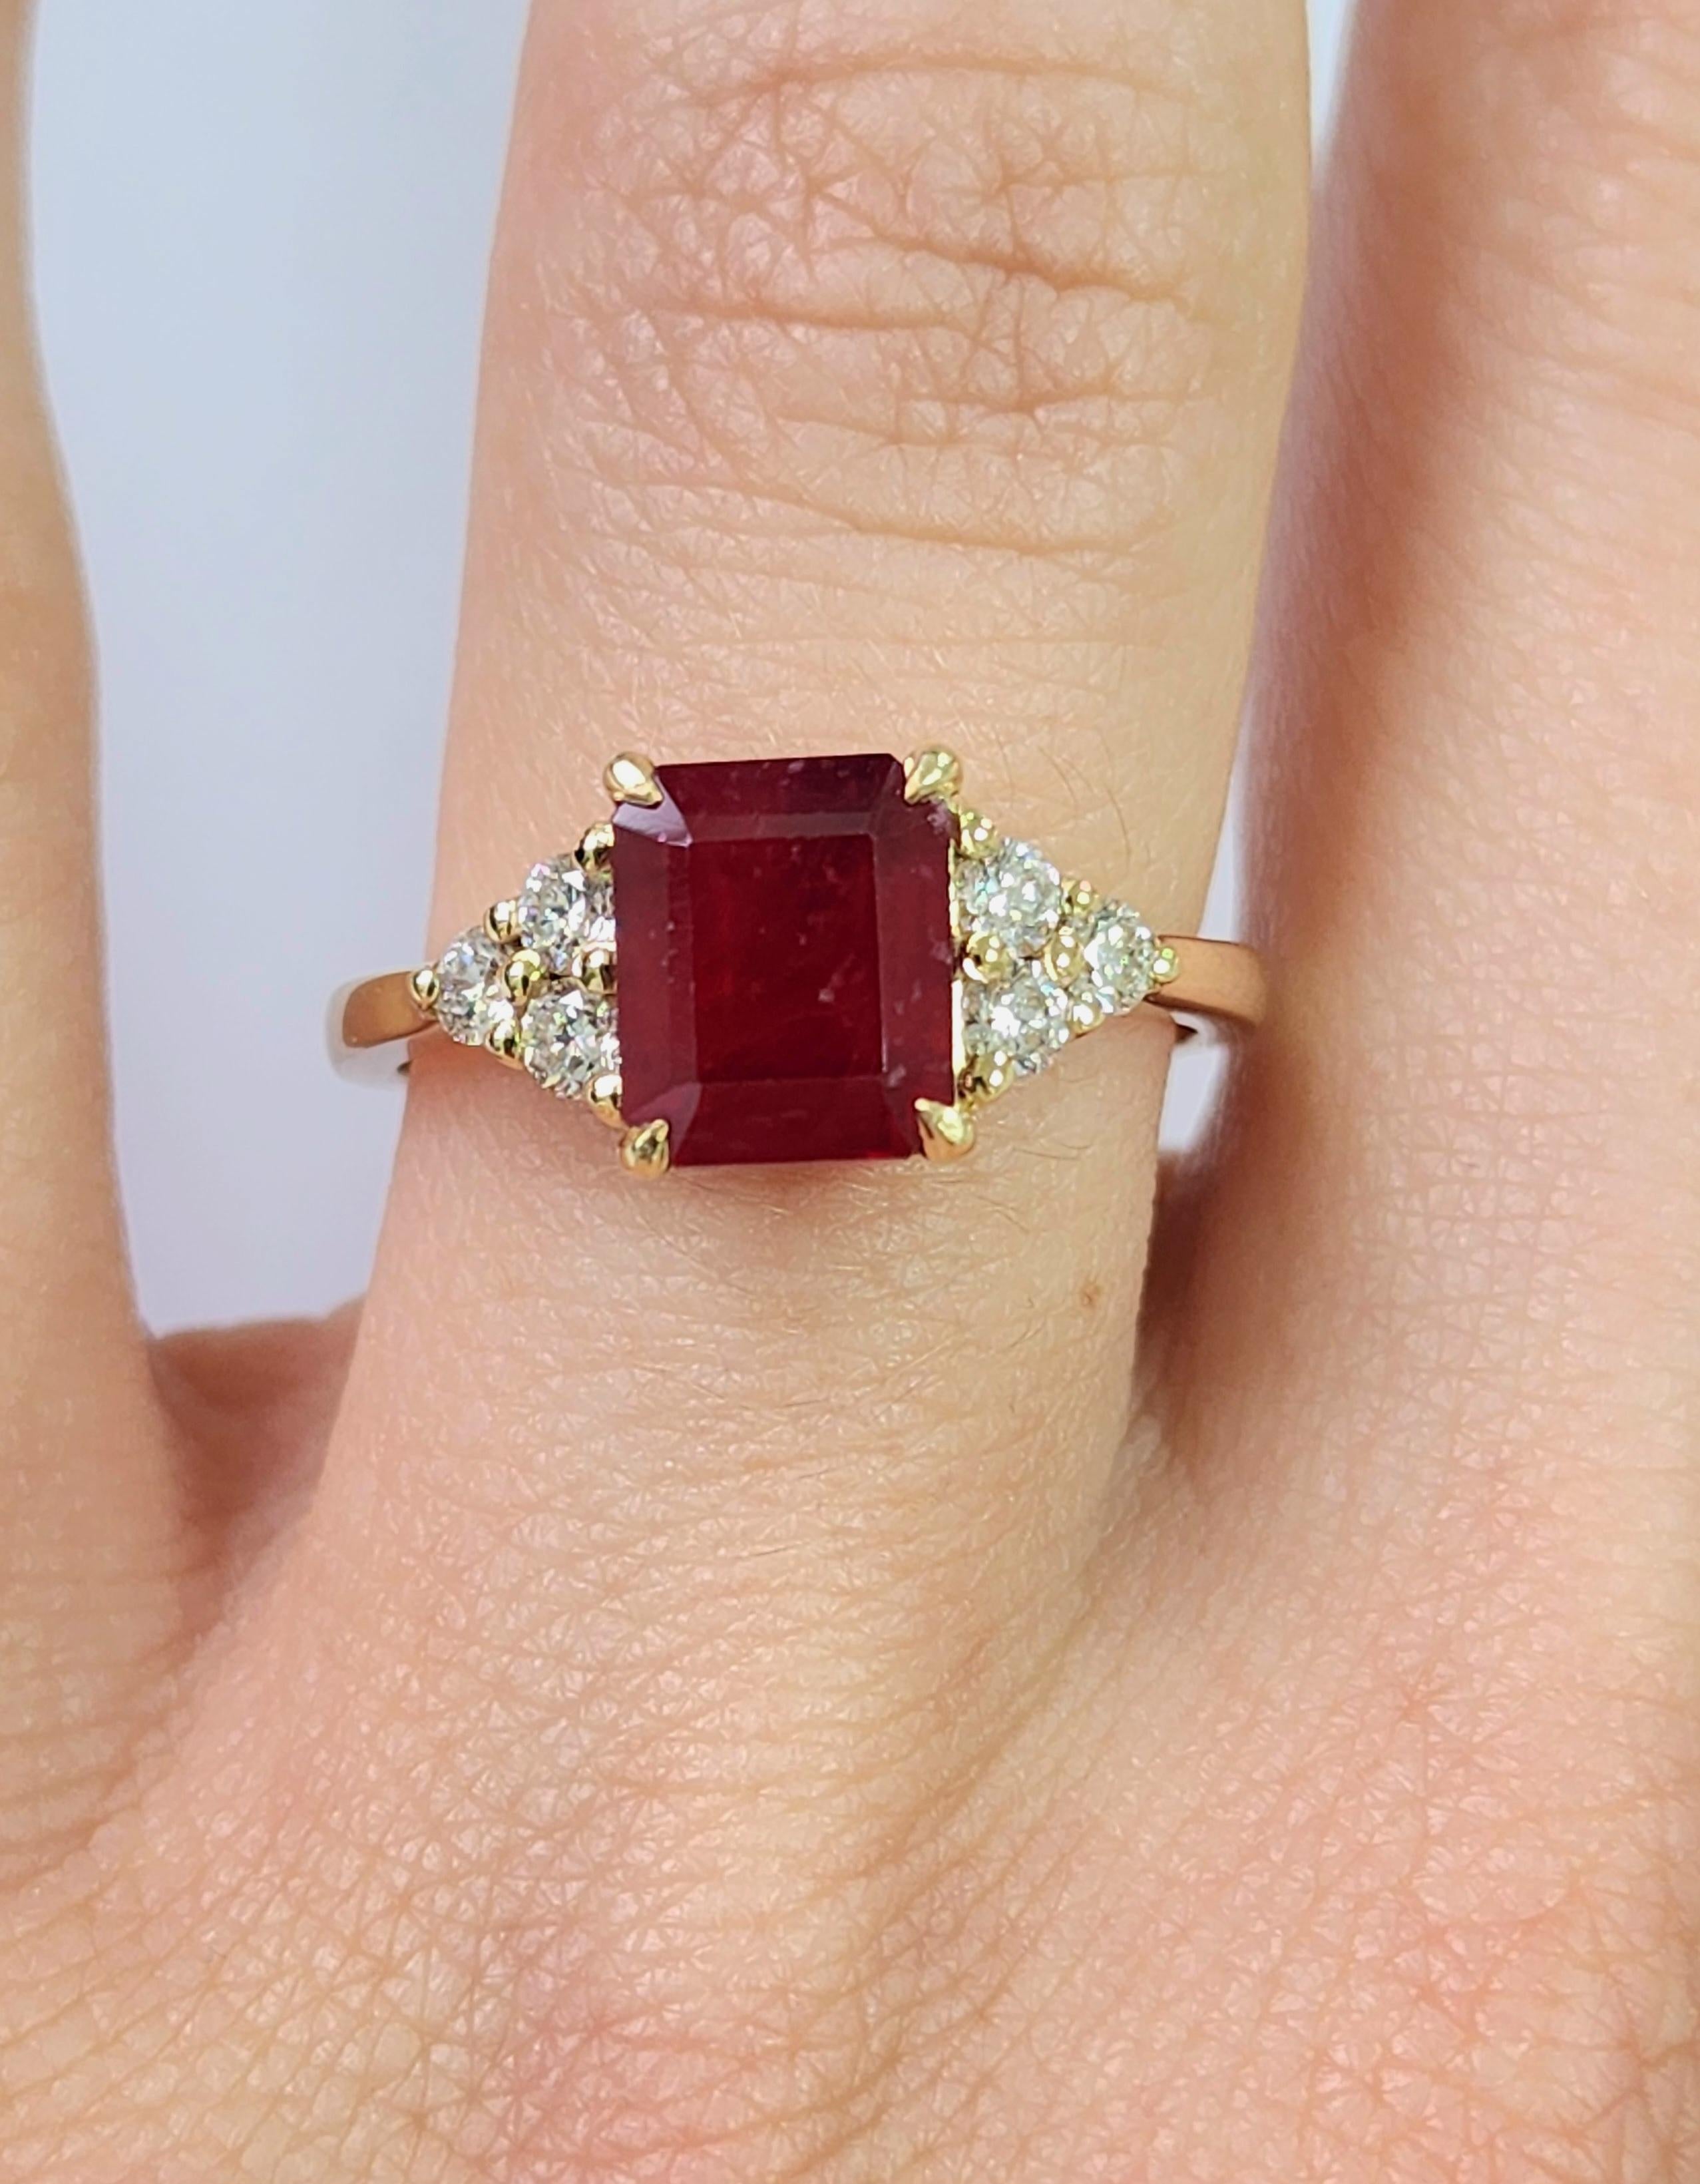 Unique Ring set with a Square Emerald Shape Red Ruby (Total Weight 2.17 Carat) adorned with smaller Round Diamonds (Total Weight 0.30 Carat) in 14K Yellow Gold 

Ruby Diamond Ring Total Carat Weight 2.47 Carat

Diamond - Centerstone
Shape: Square